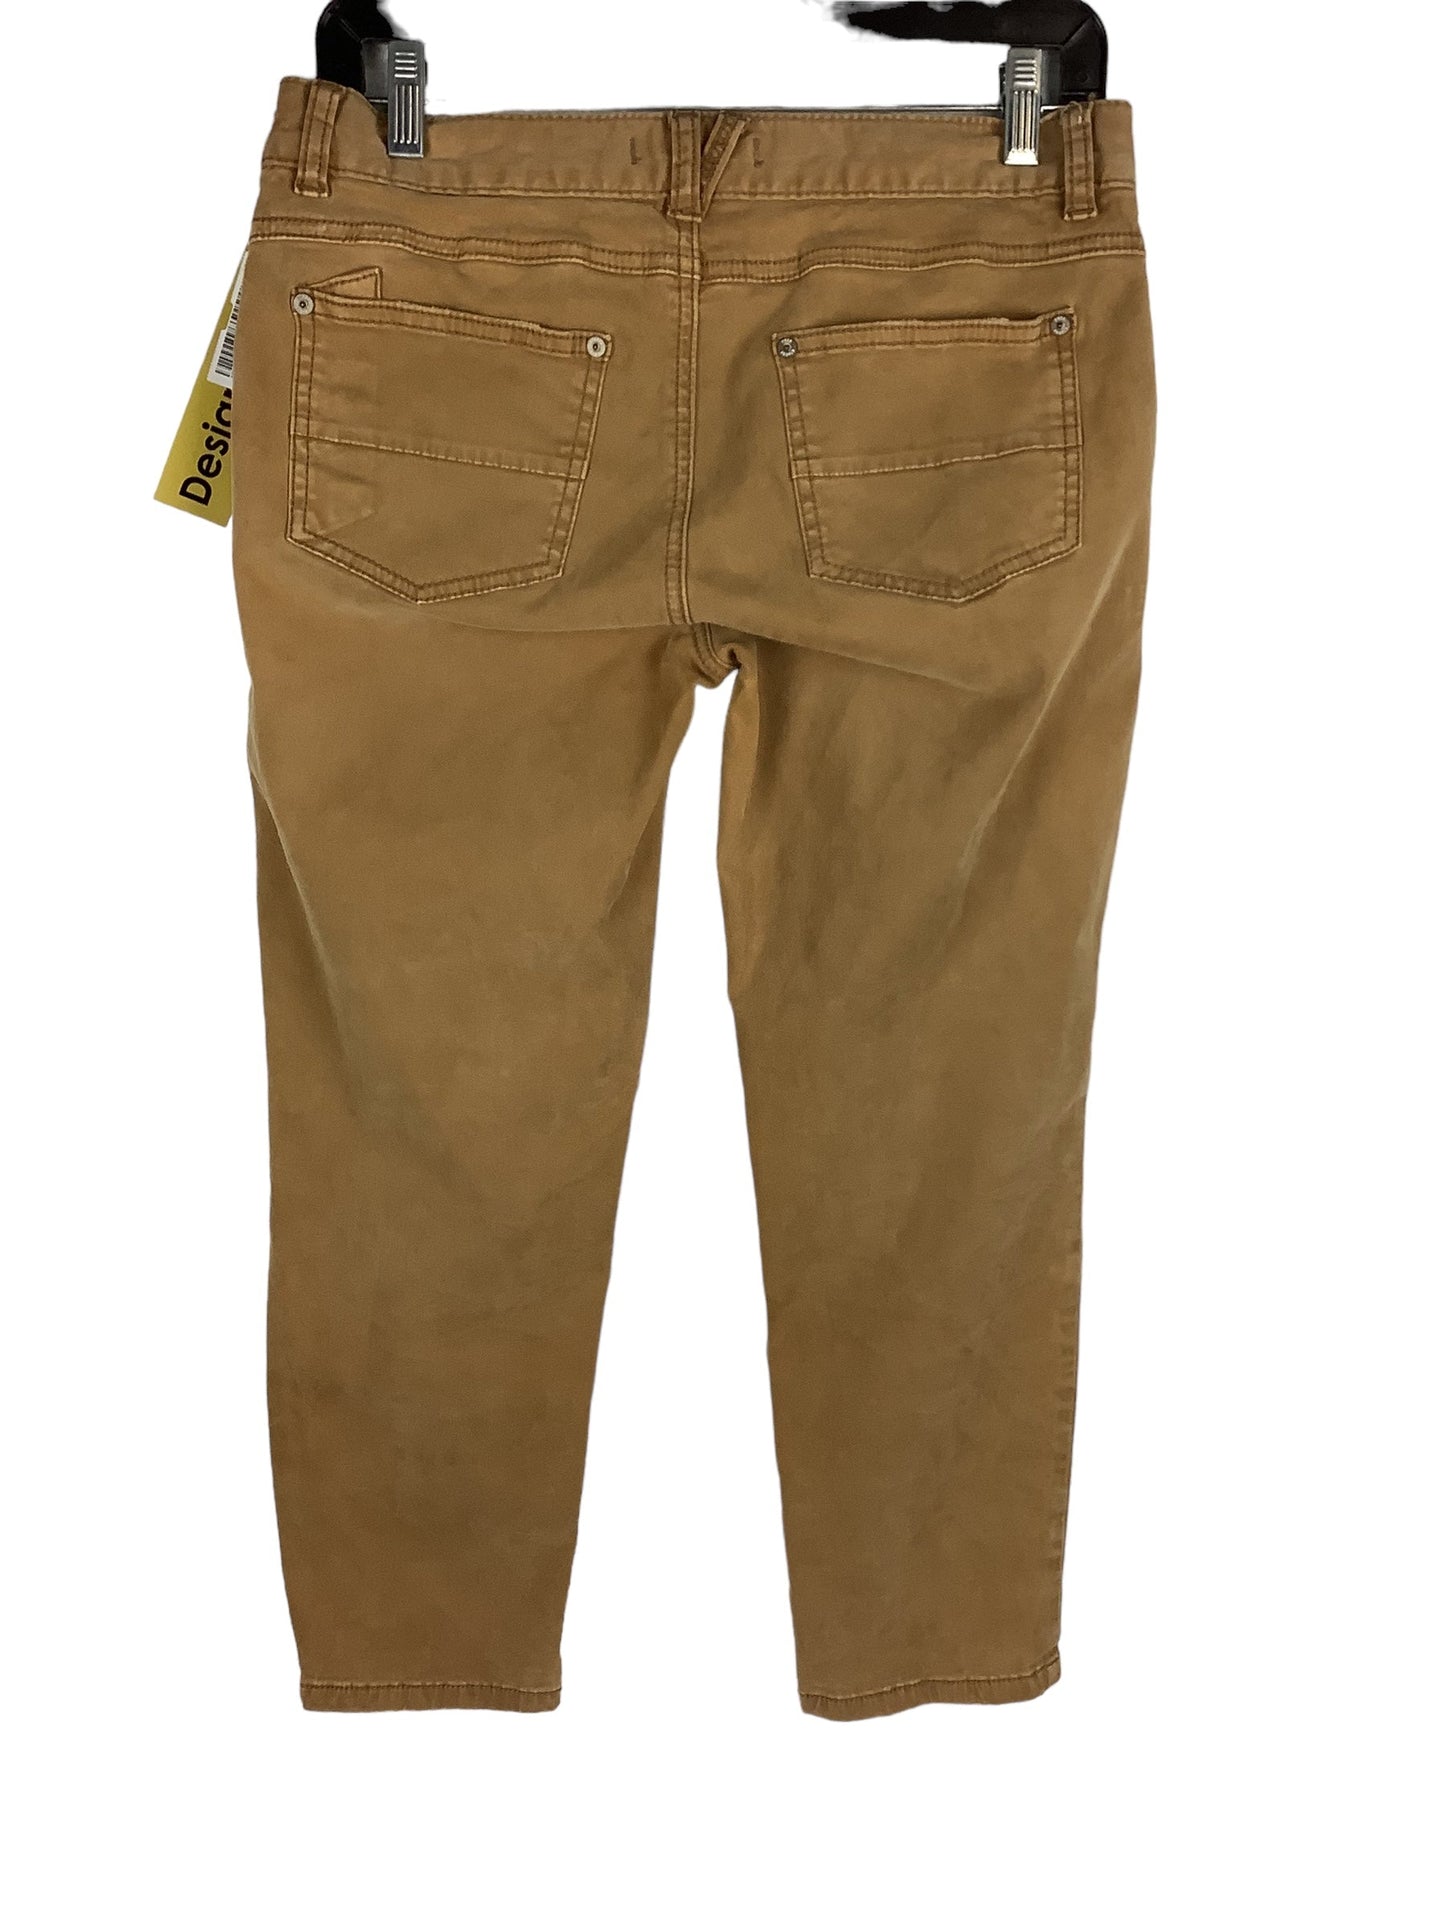 Tan Pants Other Free People, Size 28